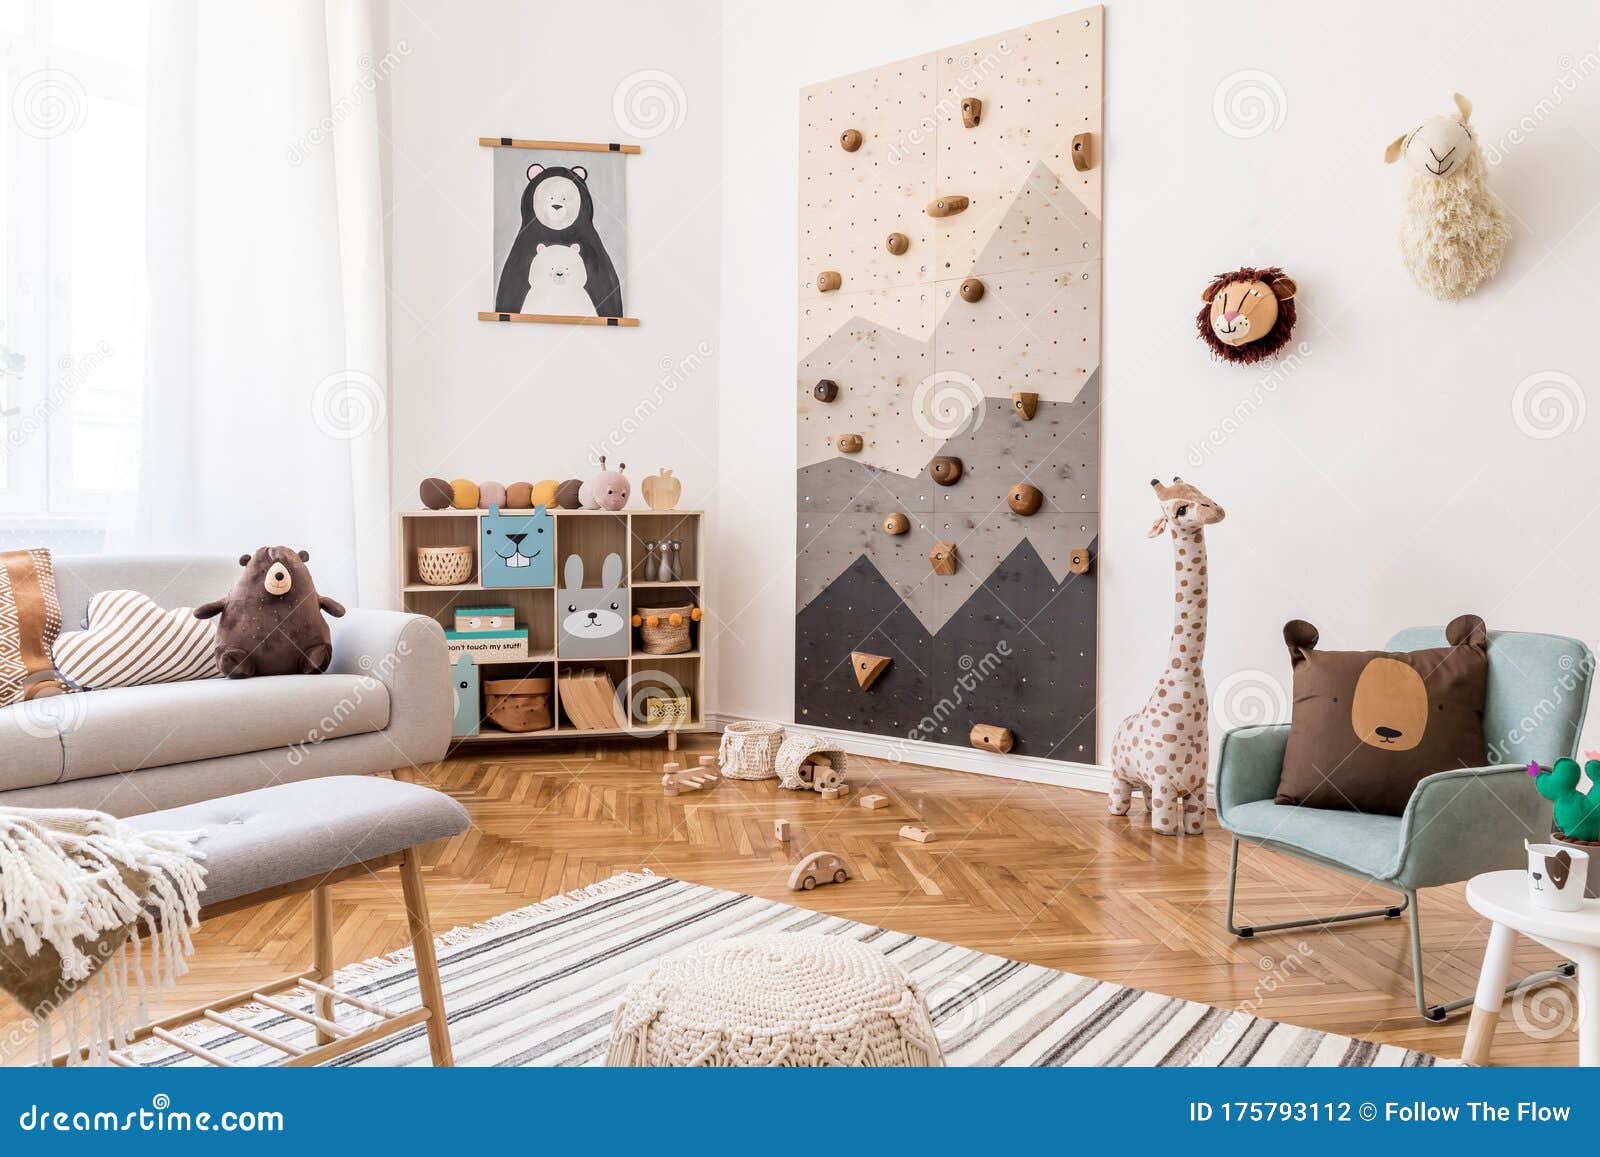 Cute Interior Of Kid Room With Baby Accessories And Toys Stock Photo Image Of Basket Green